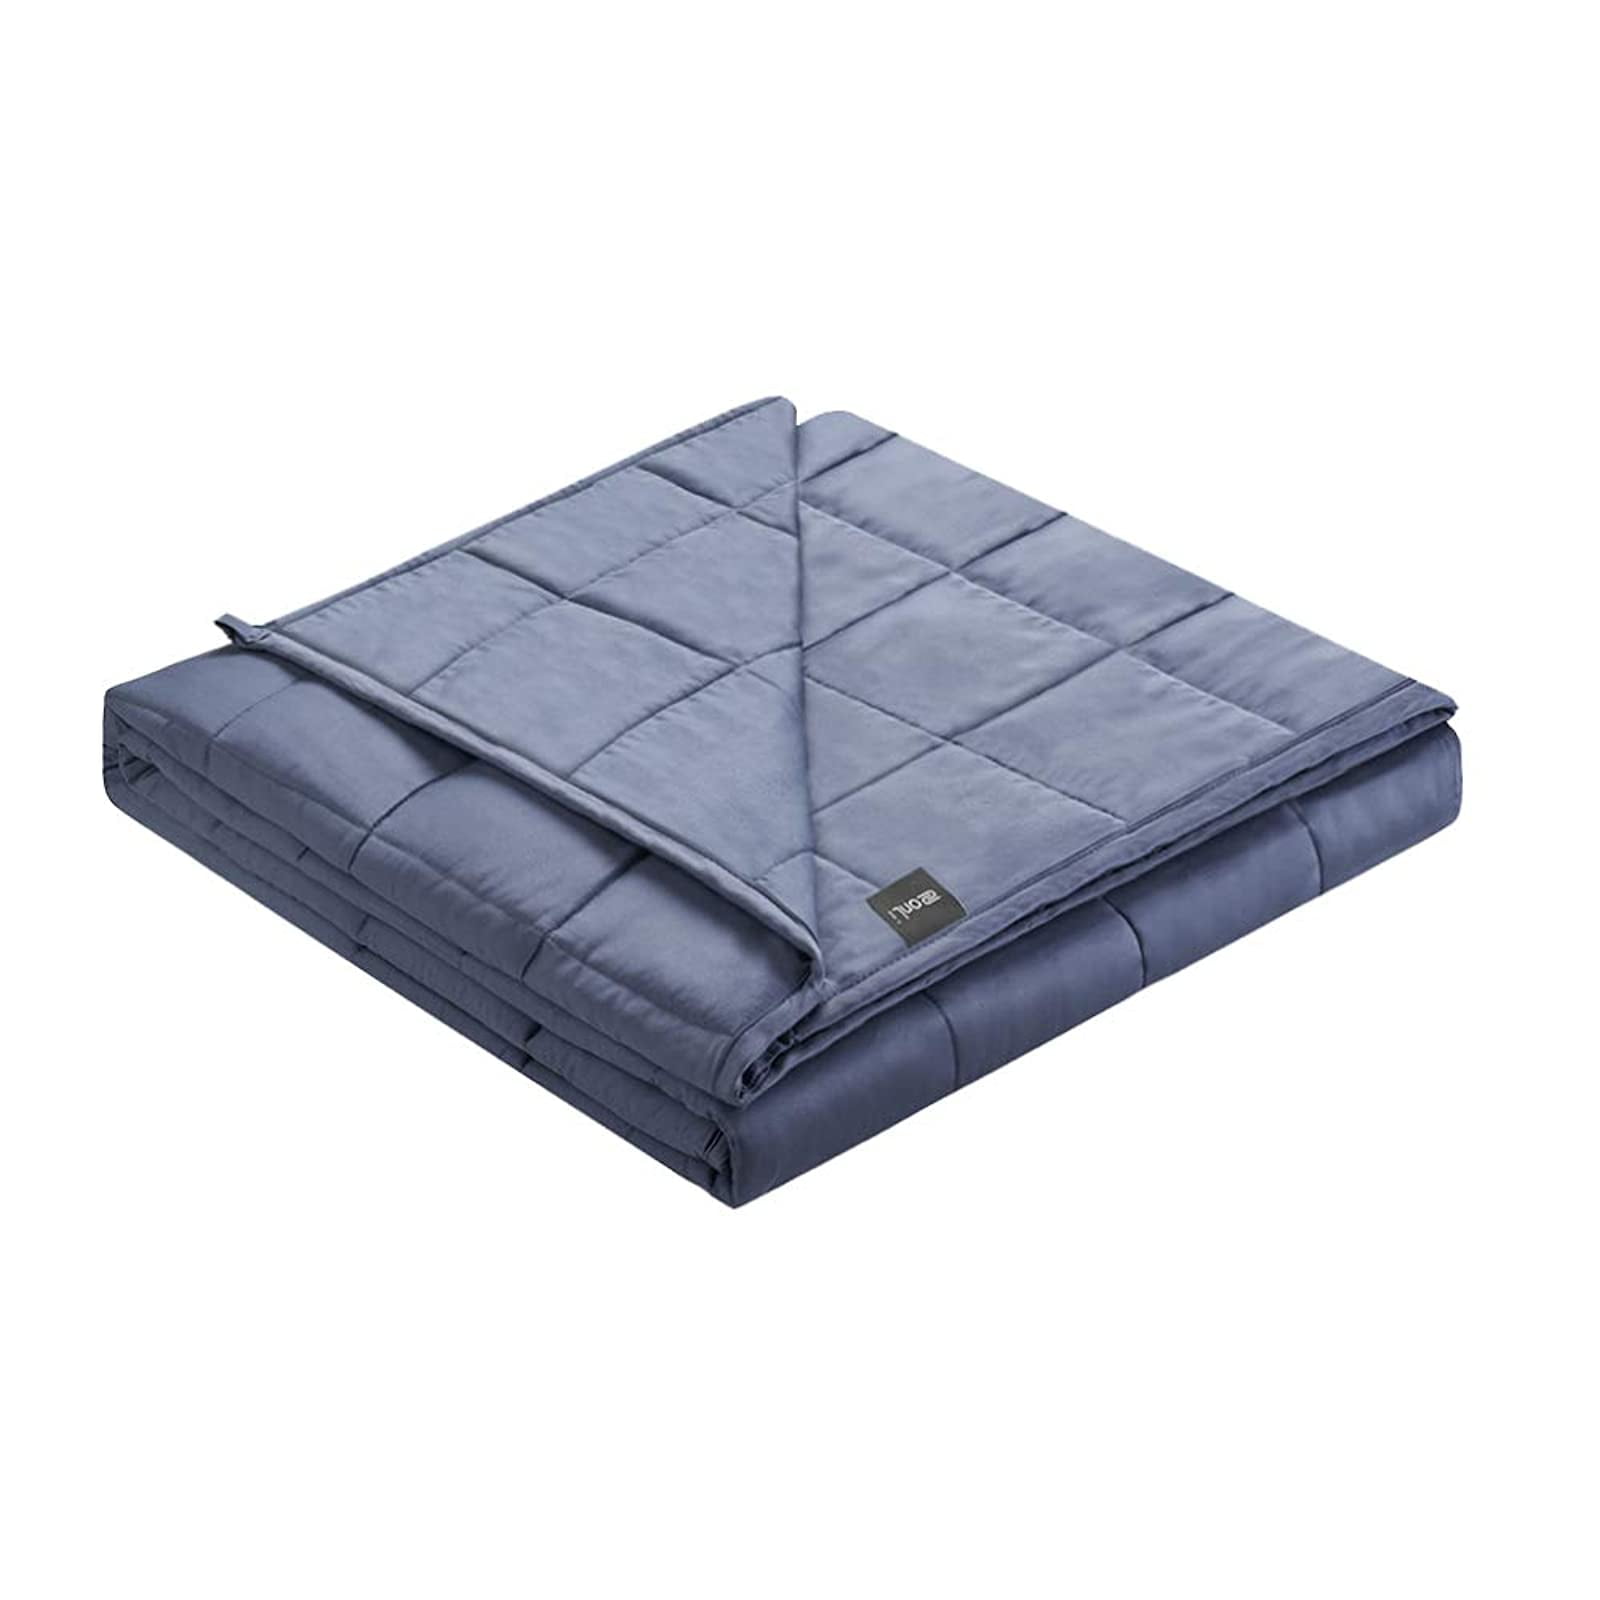 ZonLi Cooling Bamboo Weighted Blanket 15 lbs(60x80 Grey Navy, Queen